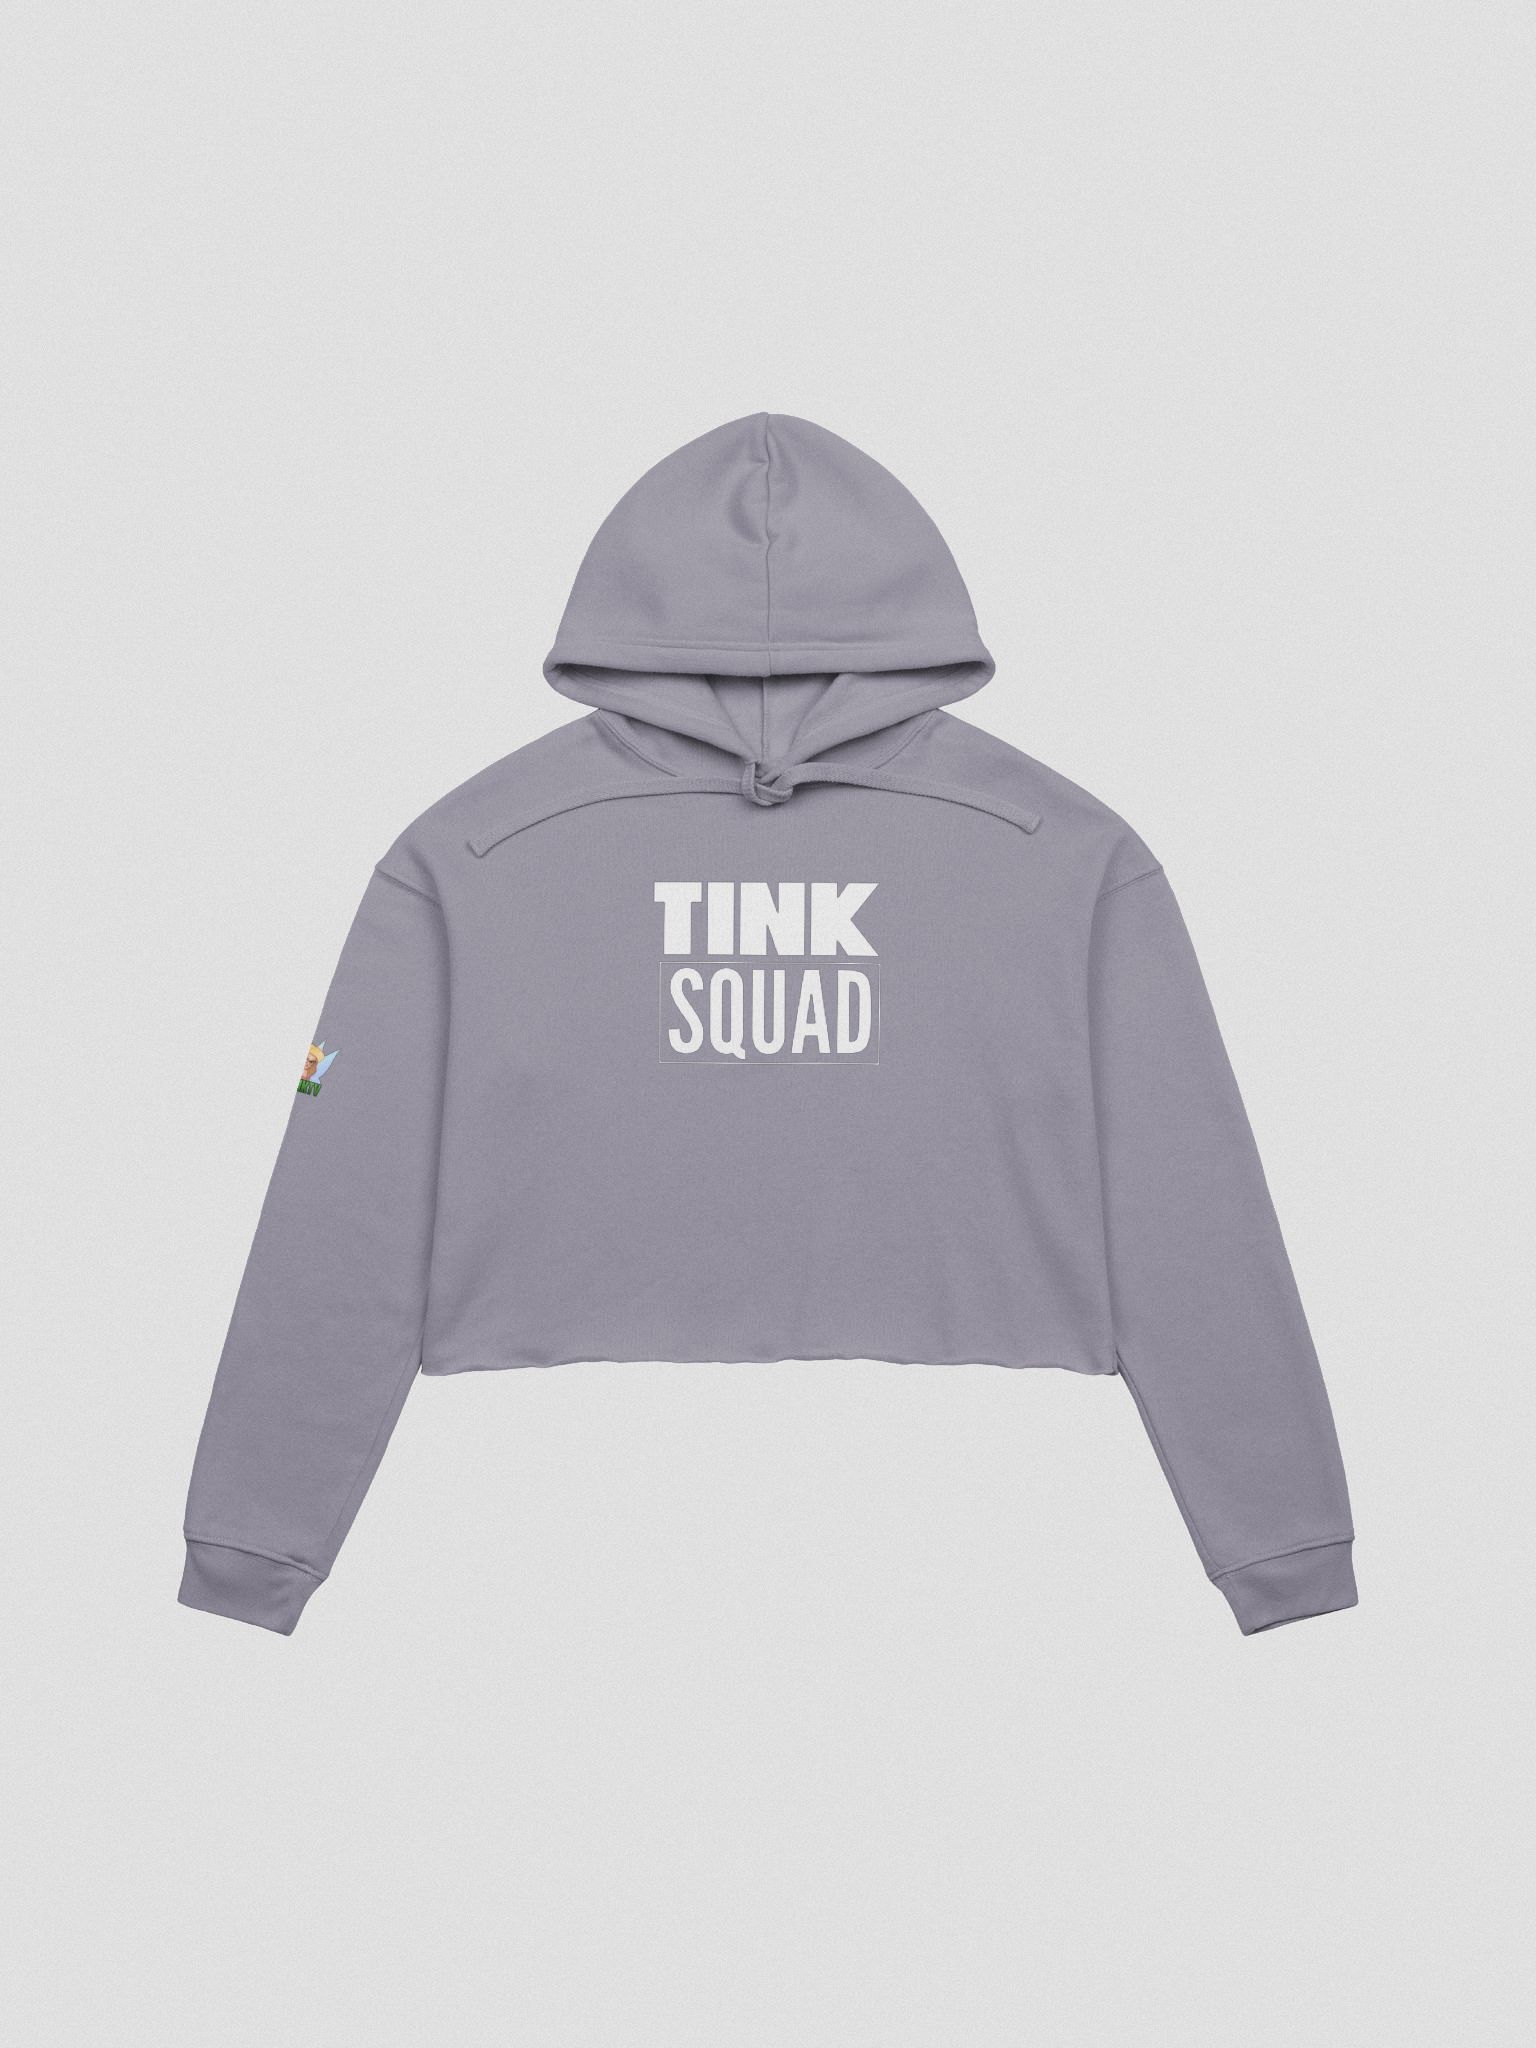 TINK SQUAD Women's Cropped Hoodie